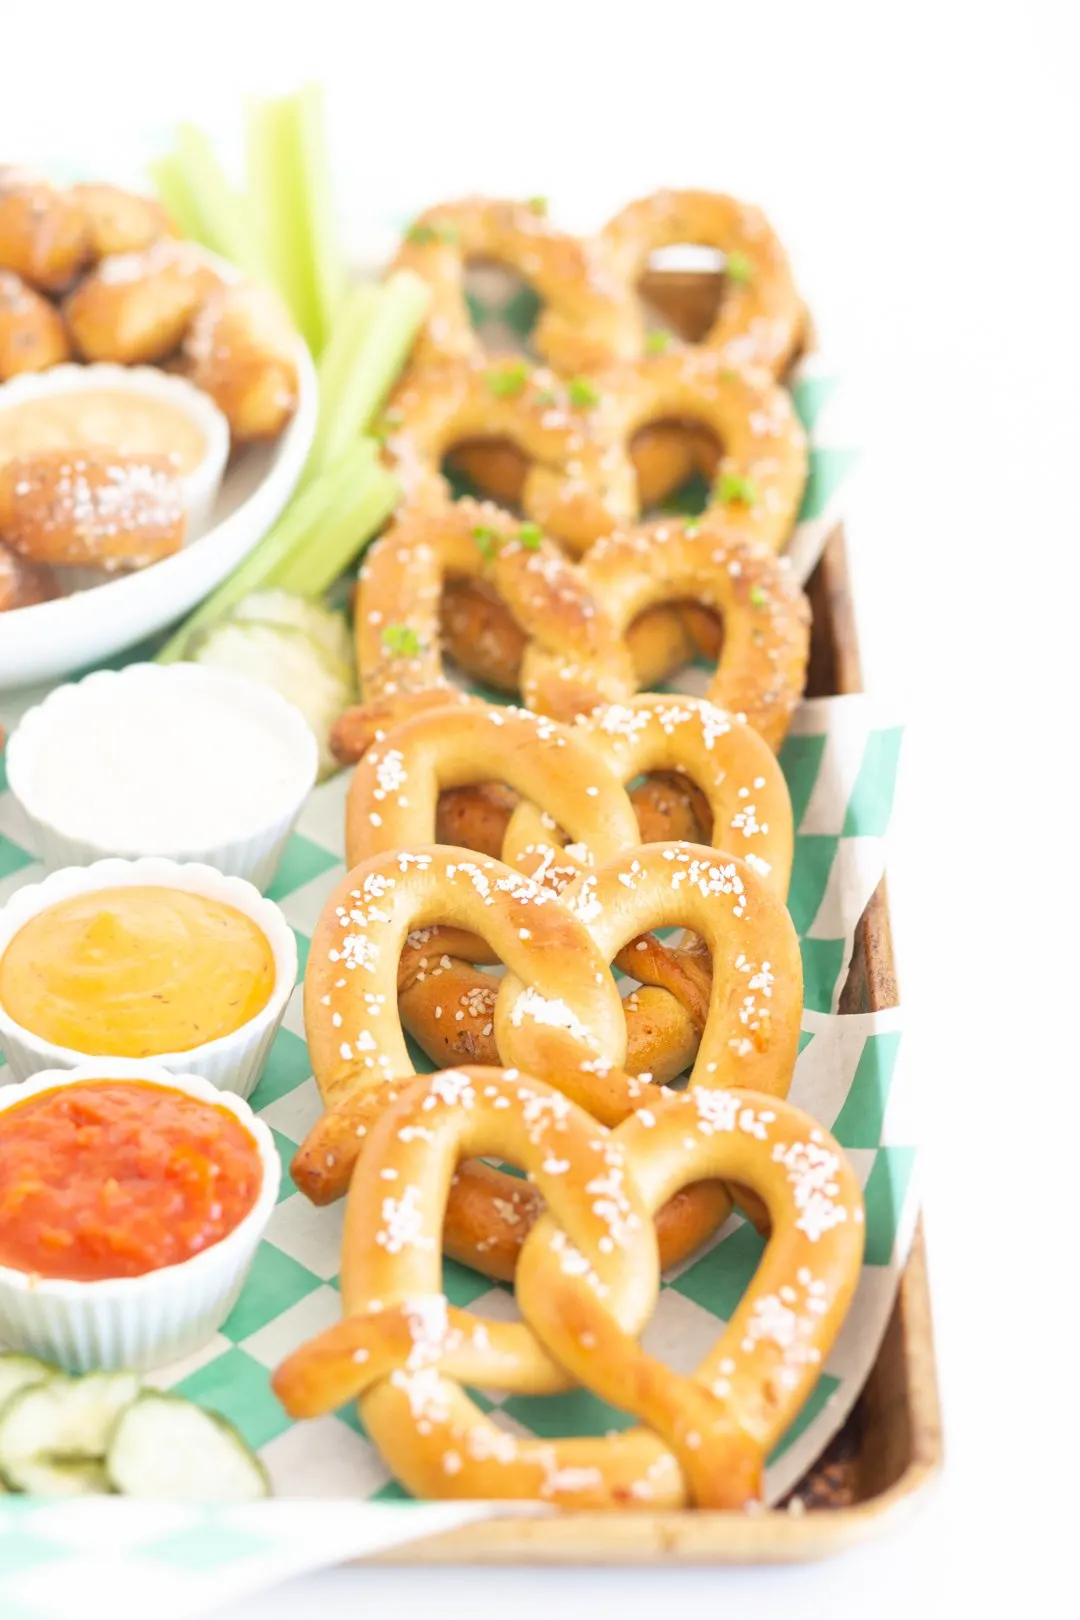 view of soft pretzel snack board with salted pretzels and herbed pretzels lined up next to a variety of dipping sauces